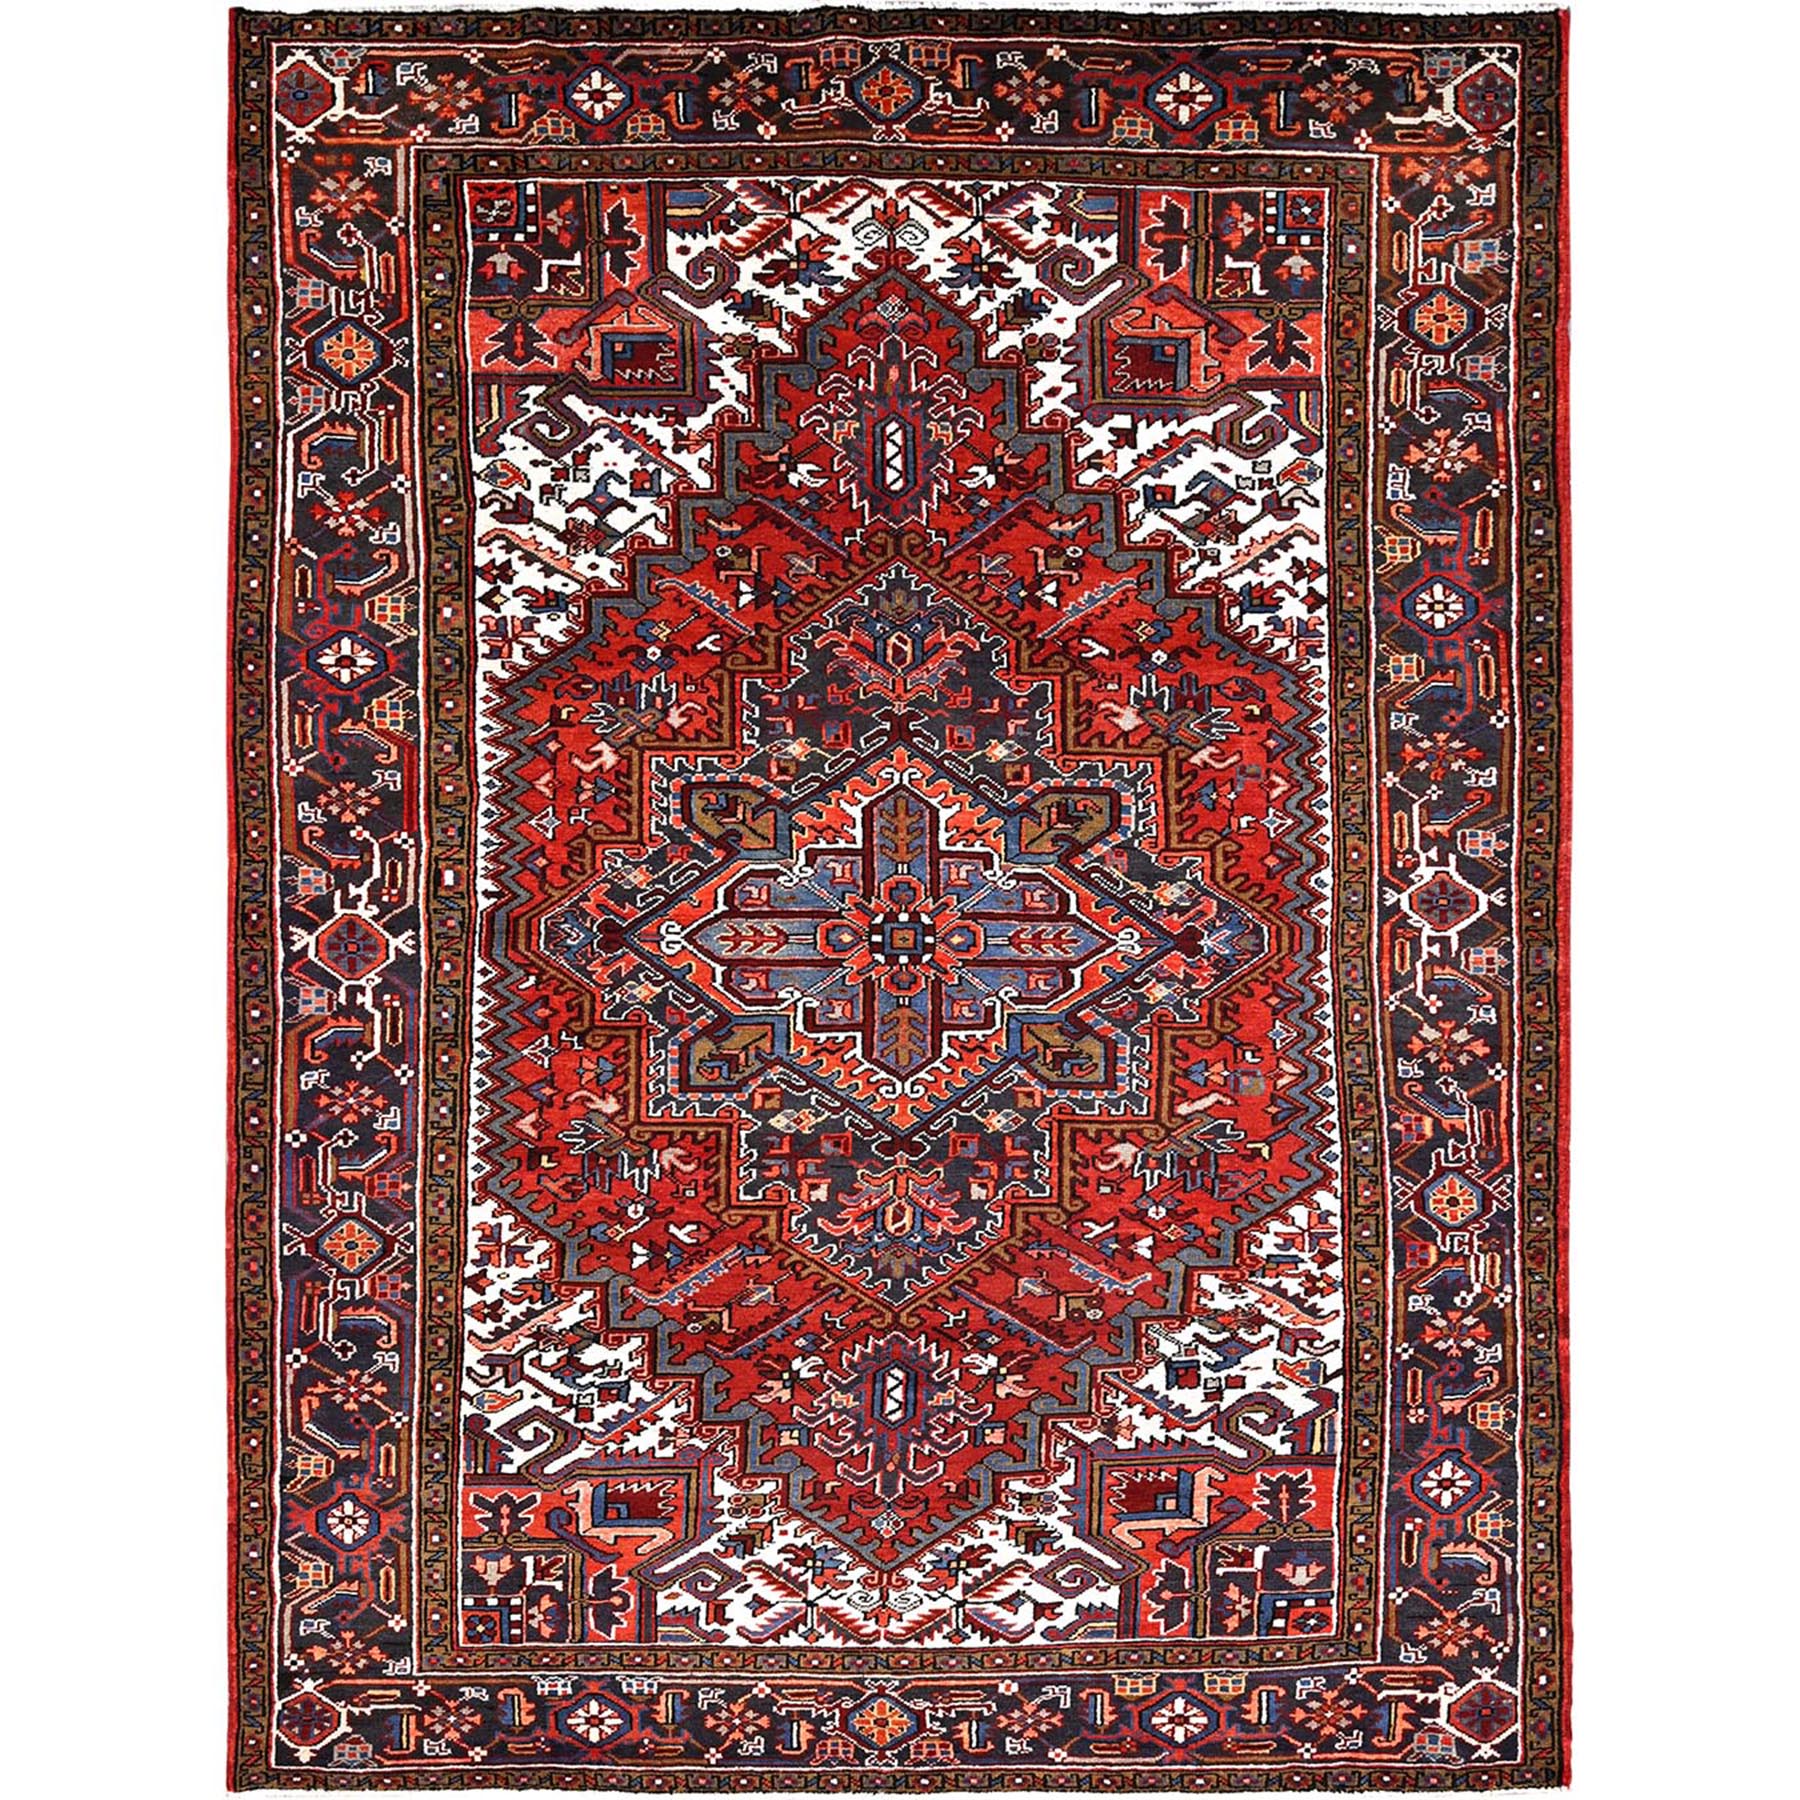 8'1"x11'1" Imperial Red, Semi Antique Persian Heriz with Village Motif, Good Condition, Rustic Feel, Worn Wool, Hand Woven, Oriental Rug 